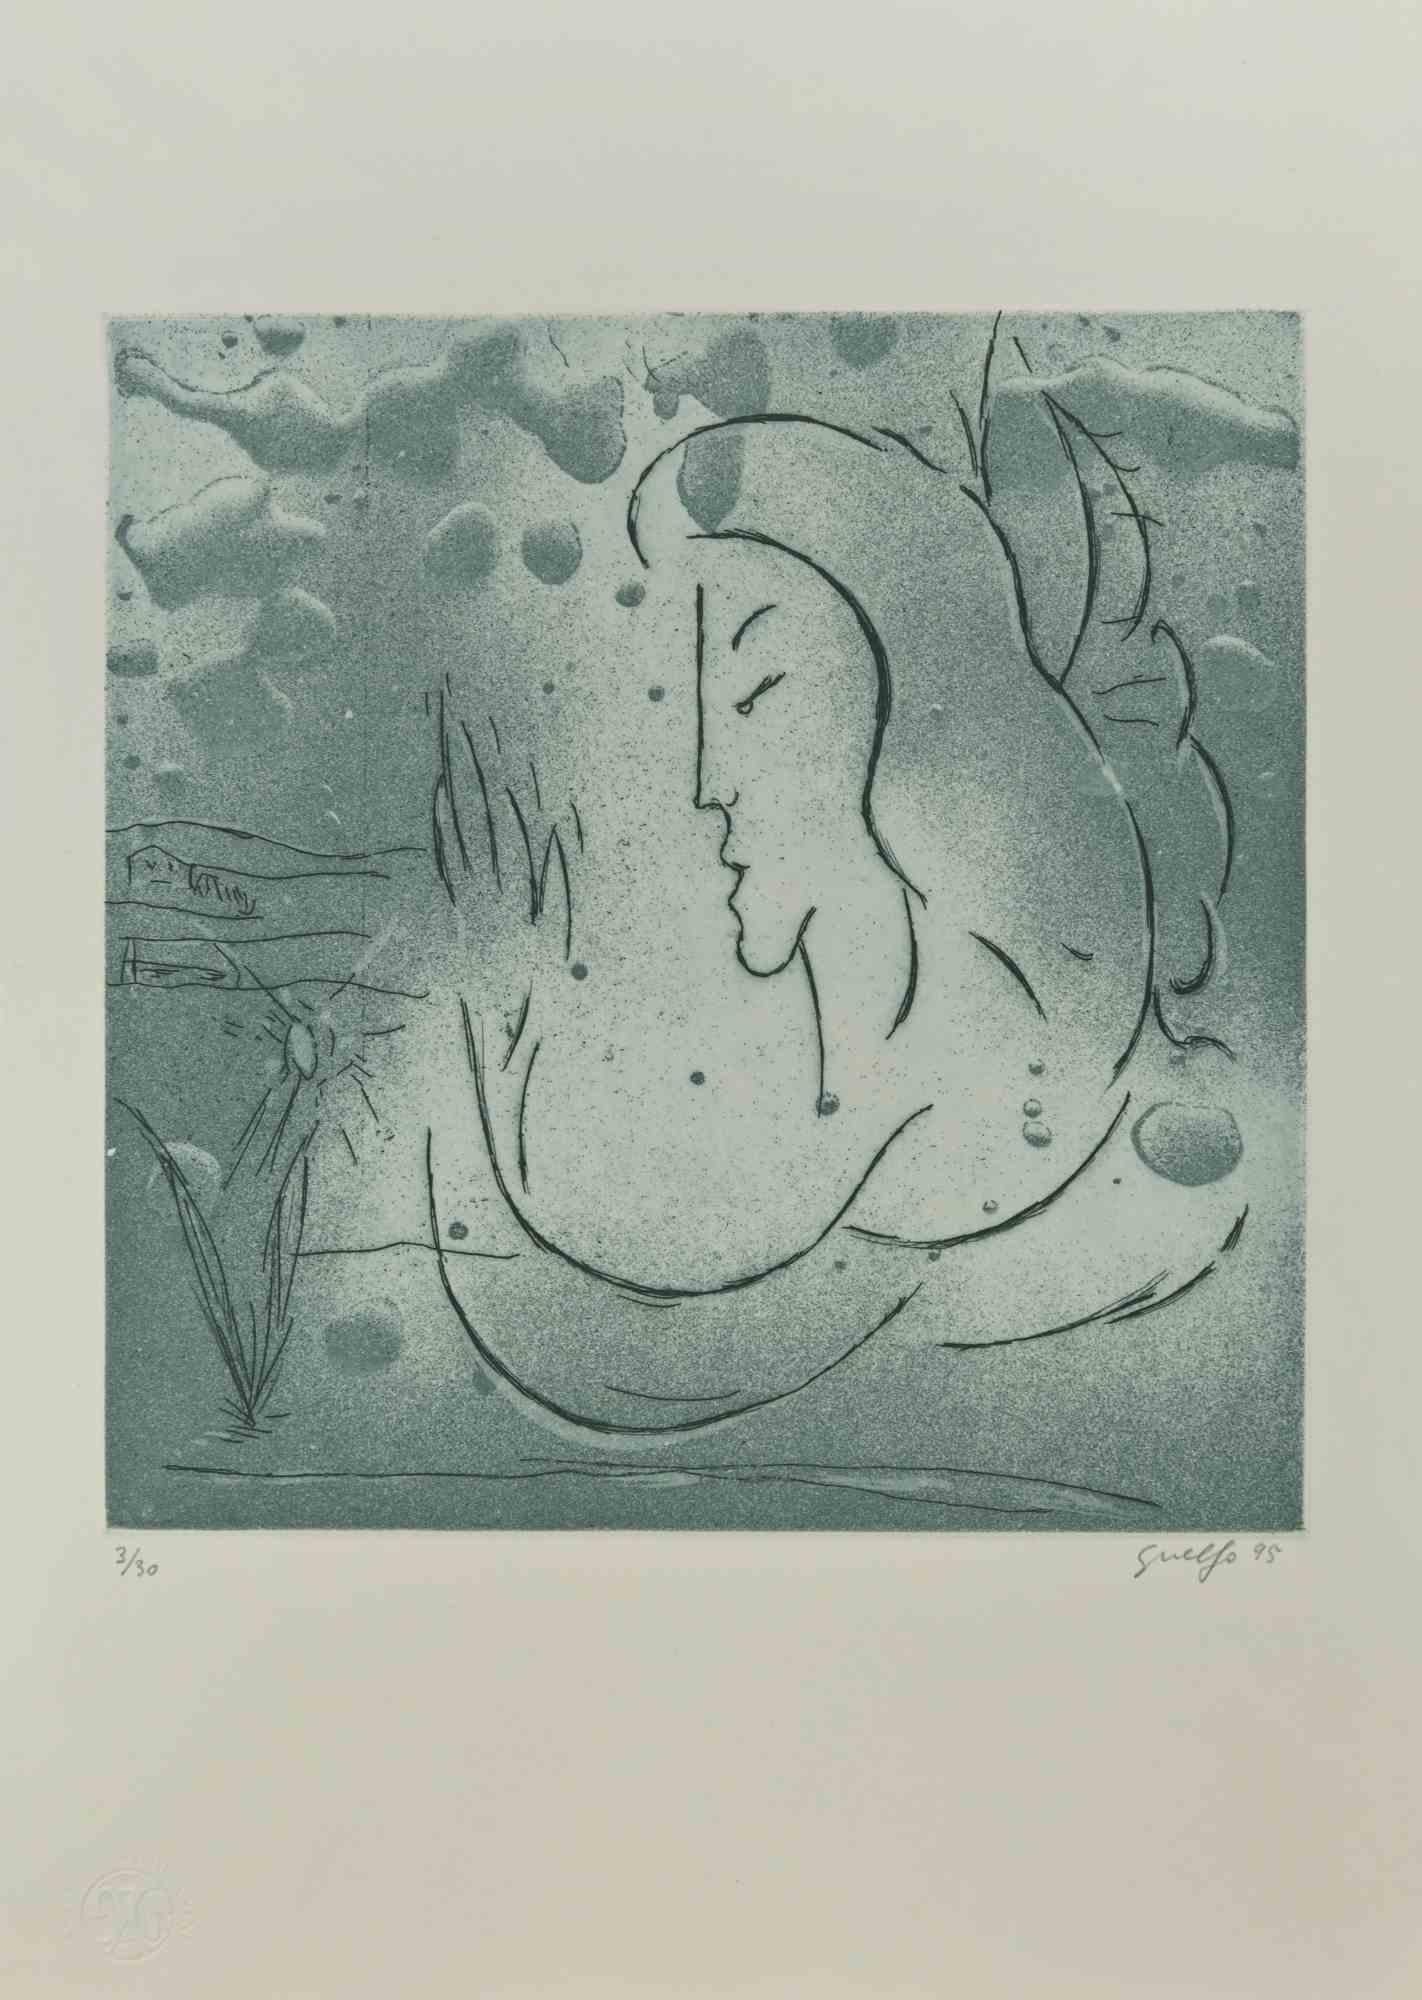 The Muse  is a Contemporary Artwork realized in Italy by Guelfo Bianchini (Ancona, 1937) in 1995 .

Etching on paper. 

Hand-signed and dated in pencil on the lower right corner: Guelfo 95 . Numbered on the lower left corner in pencil: 3/30.